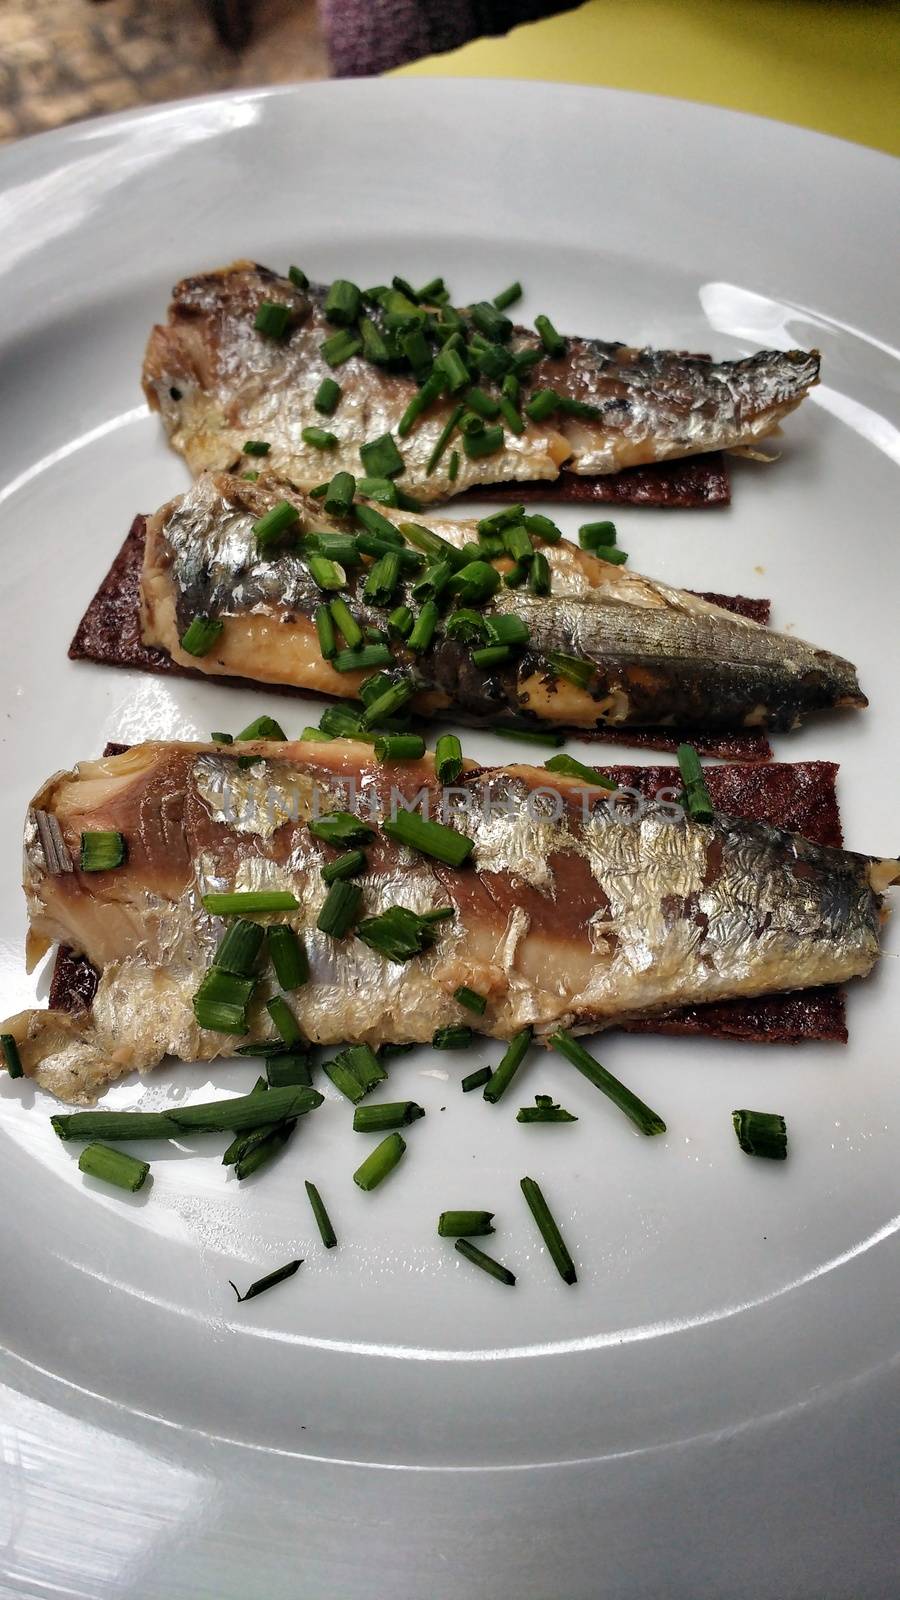 Sardines flavored with chives on a plate by soniabonet